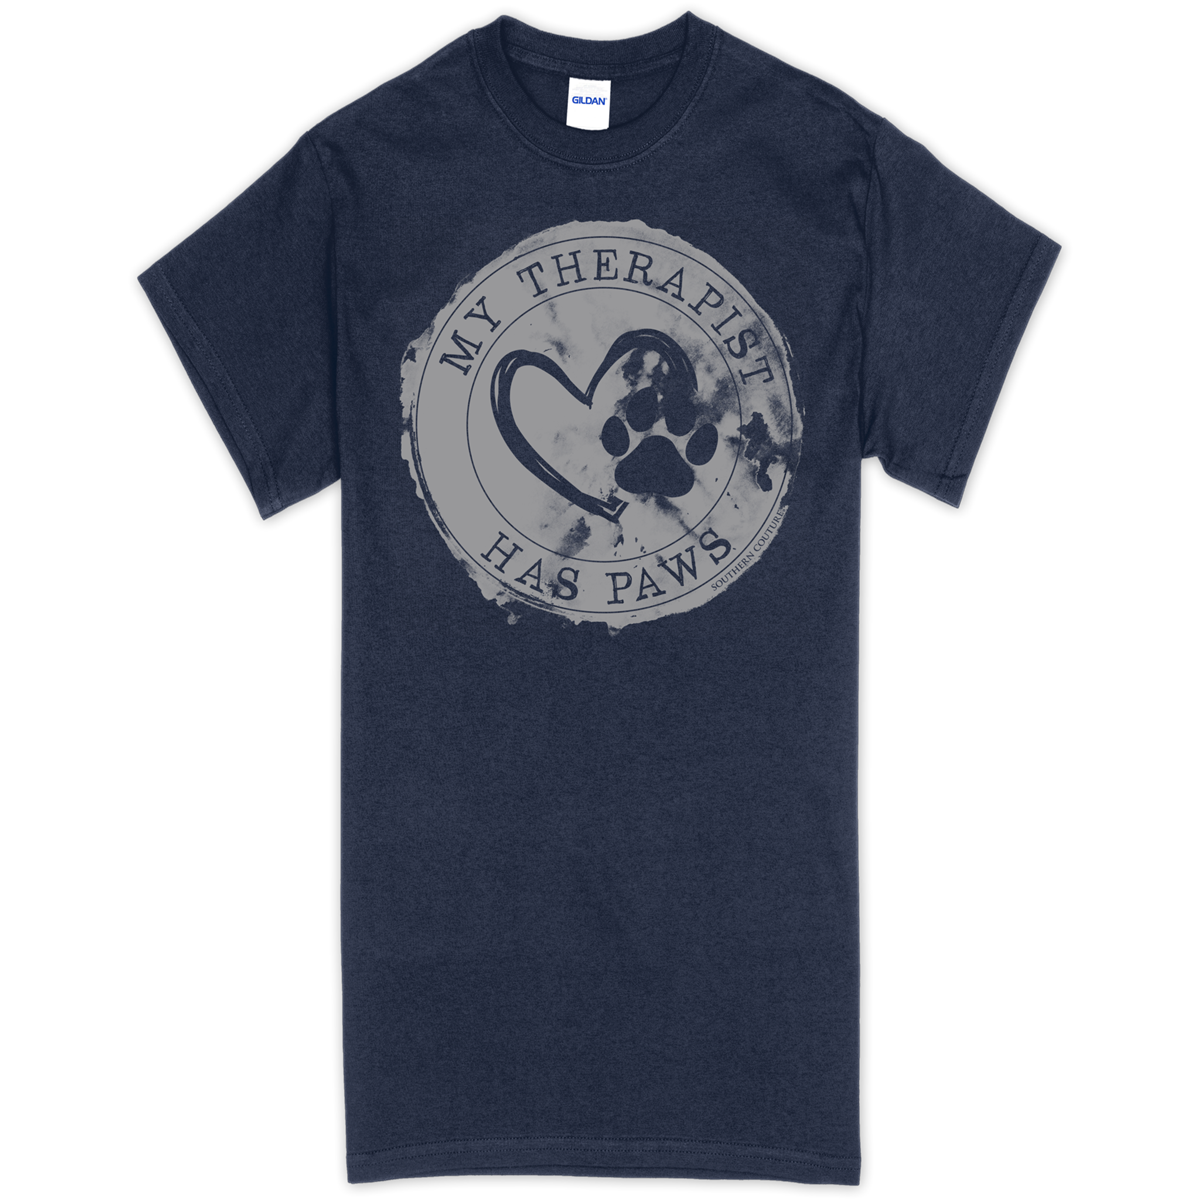 Southern Couture Therapist Has Paws Soft T-Shirt